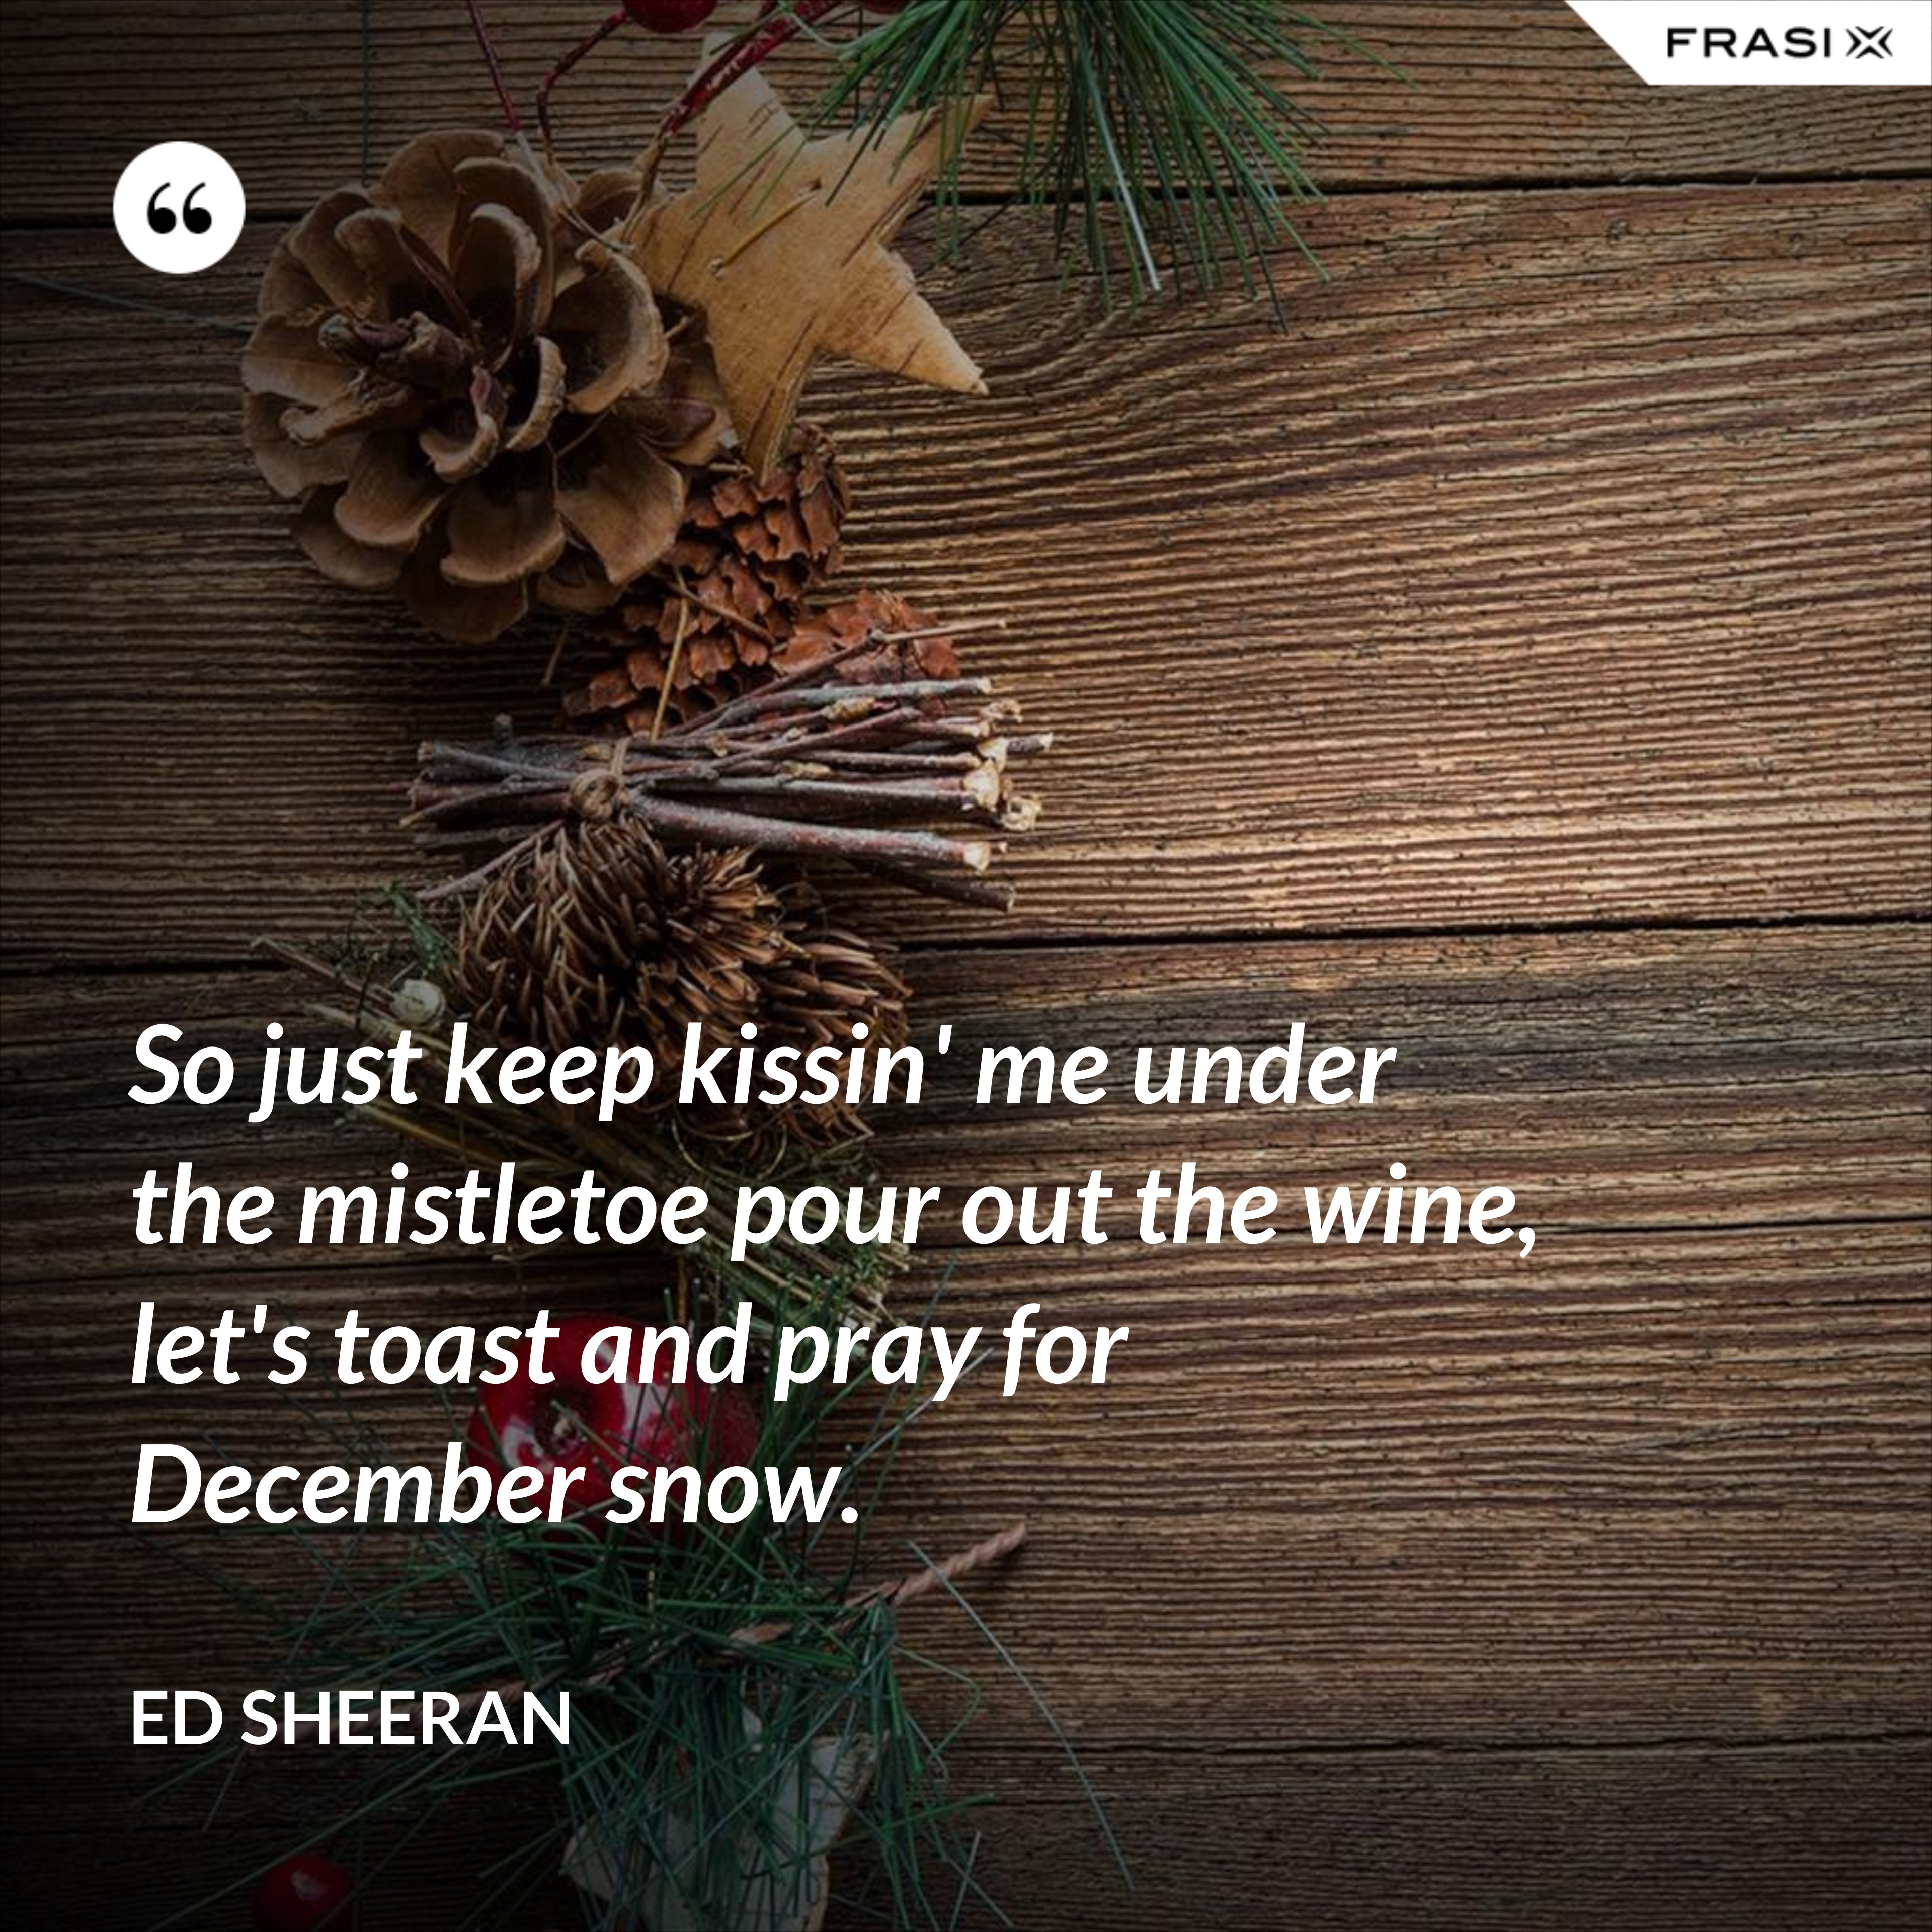 So just keep kissin' me under the mistletoe pour out the wine, let's toast and pray for December snow. - Ed Sheeran